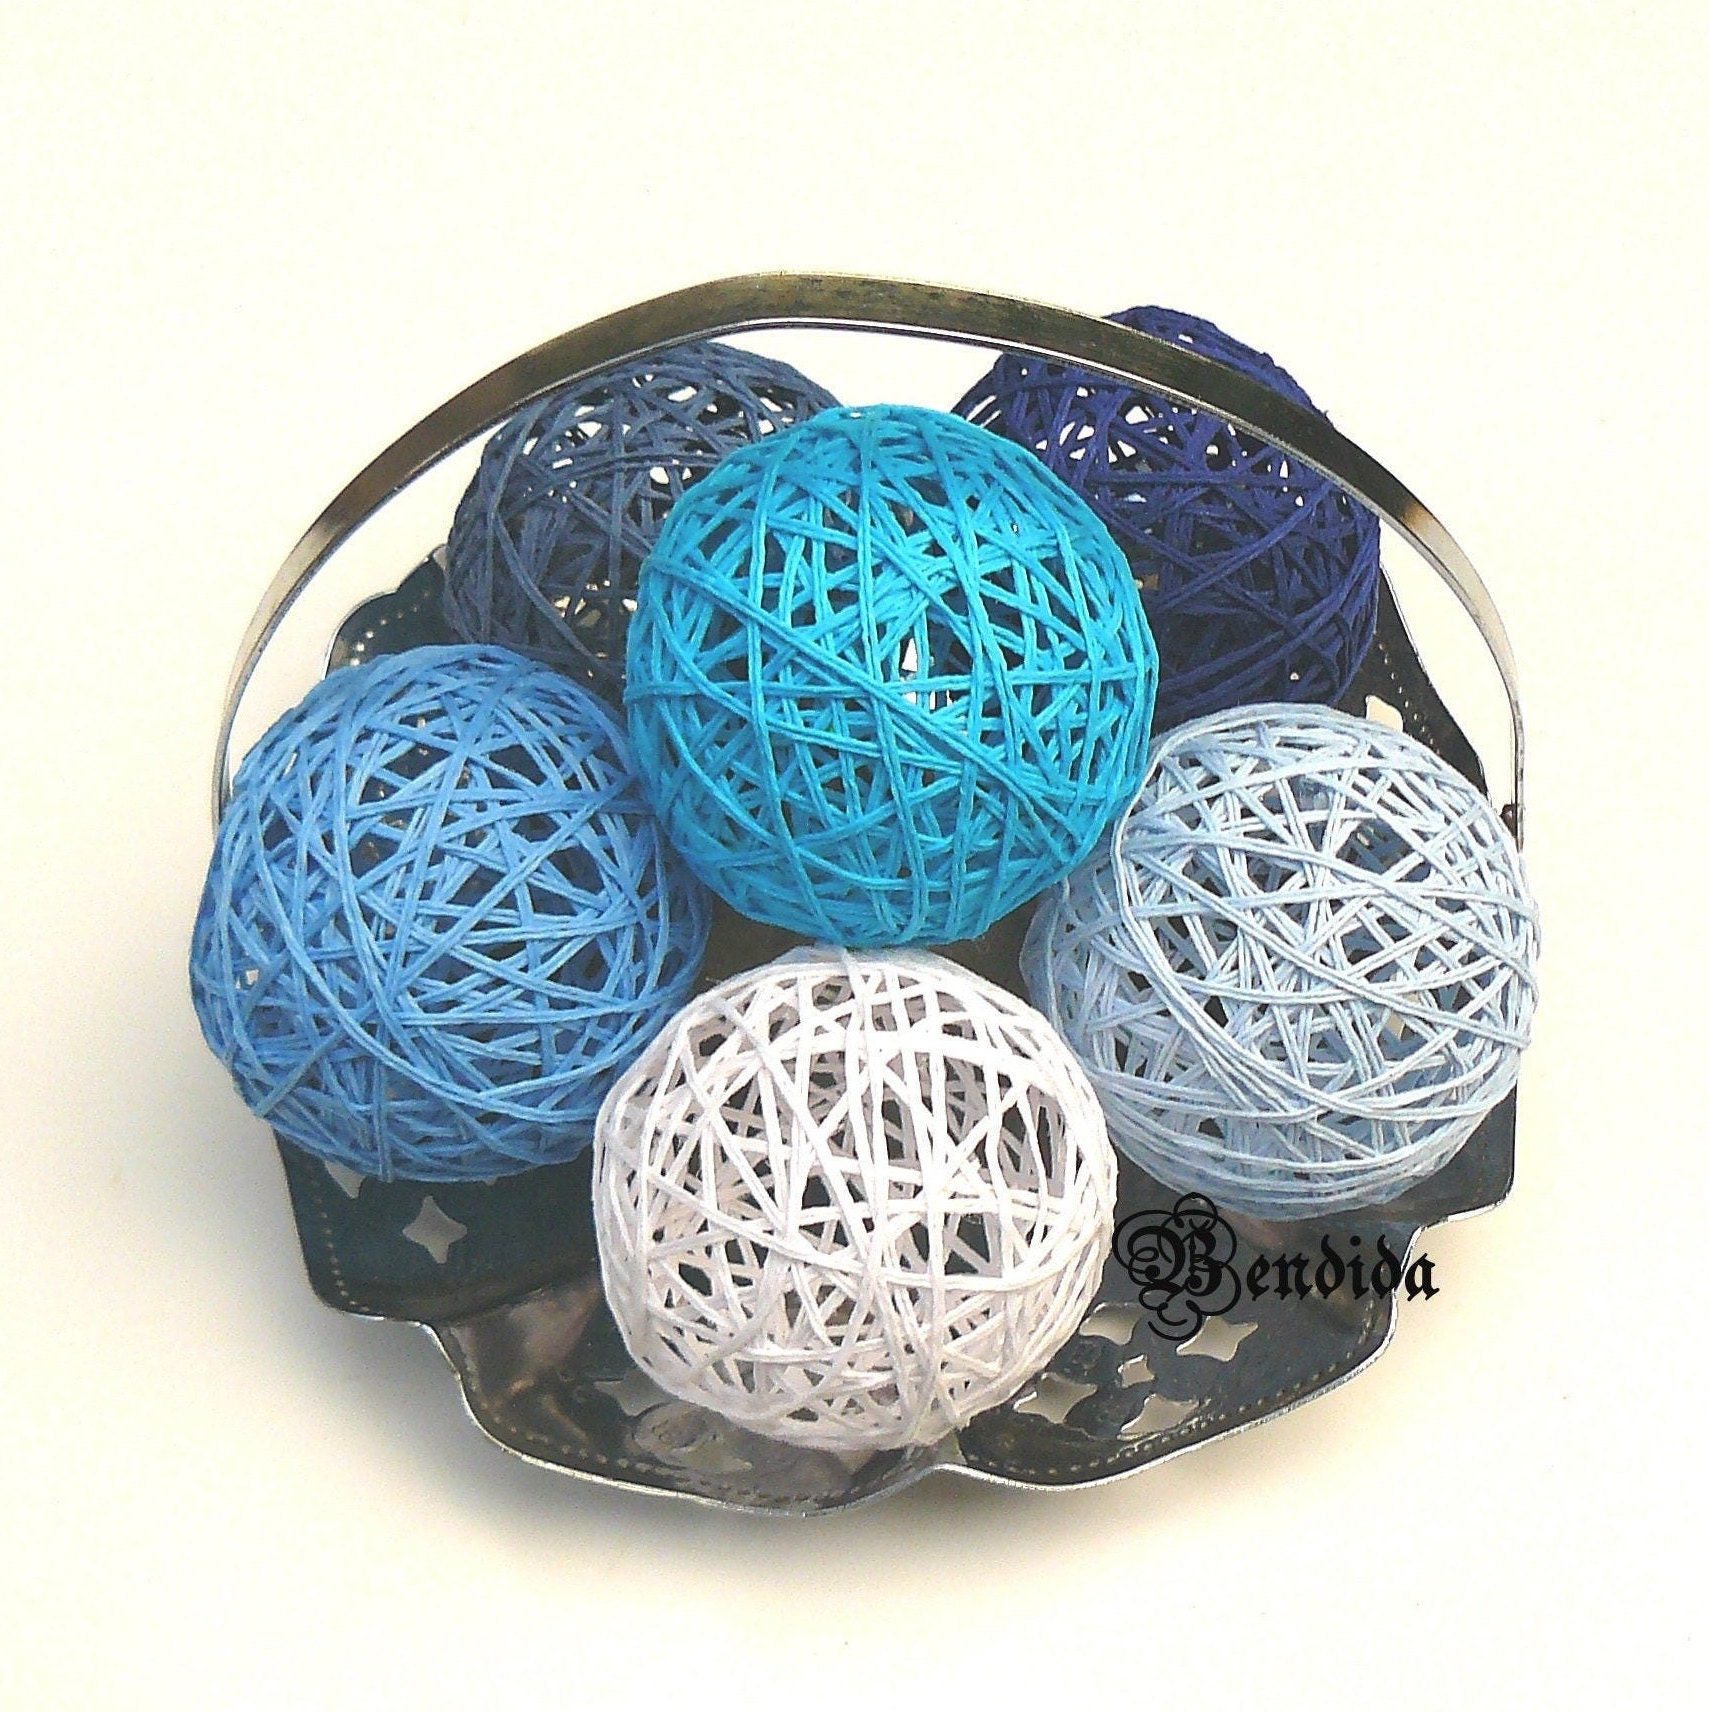 Nautical Home Decor. Blue Decorative Balls for Bowl Vase Fillers Rope Orbs Wrap Yarn Spheres Dining Room Table Centerpiece Tiered Tray